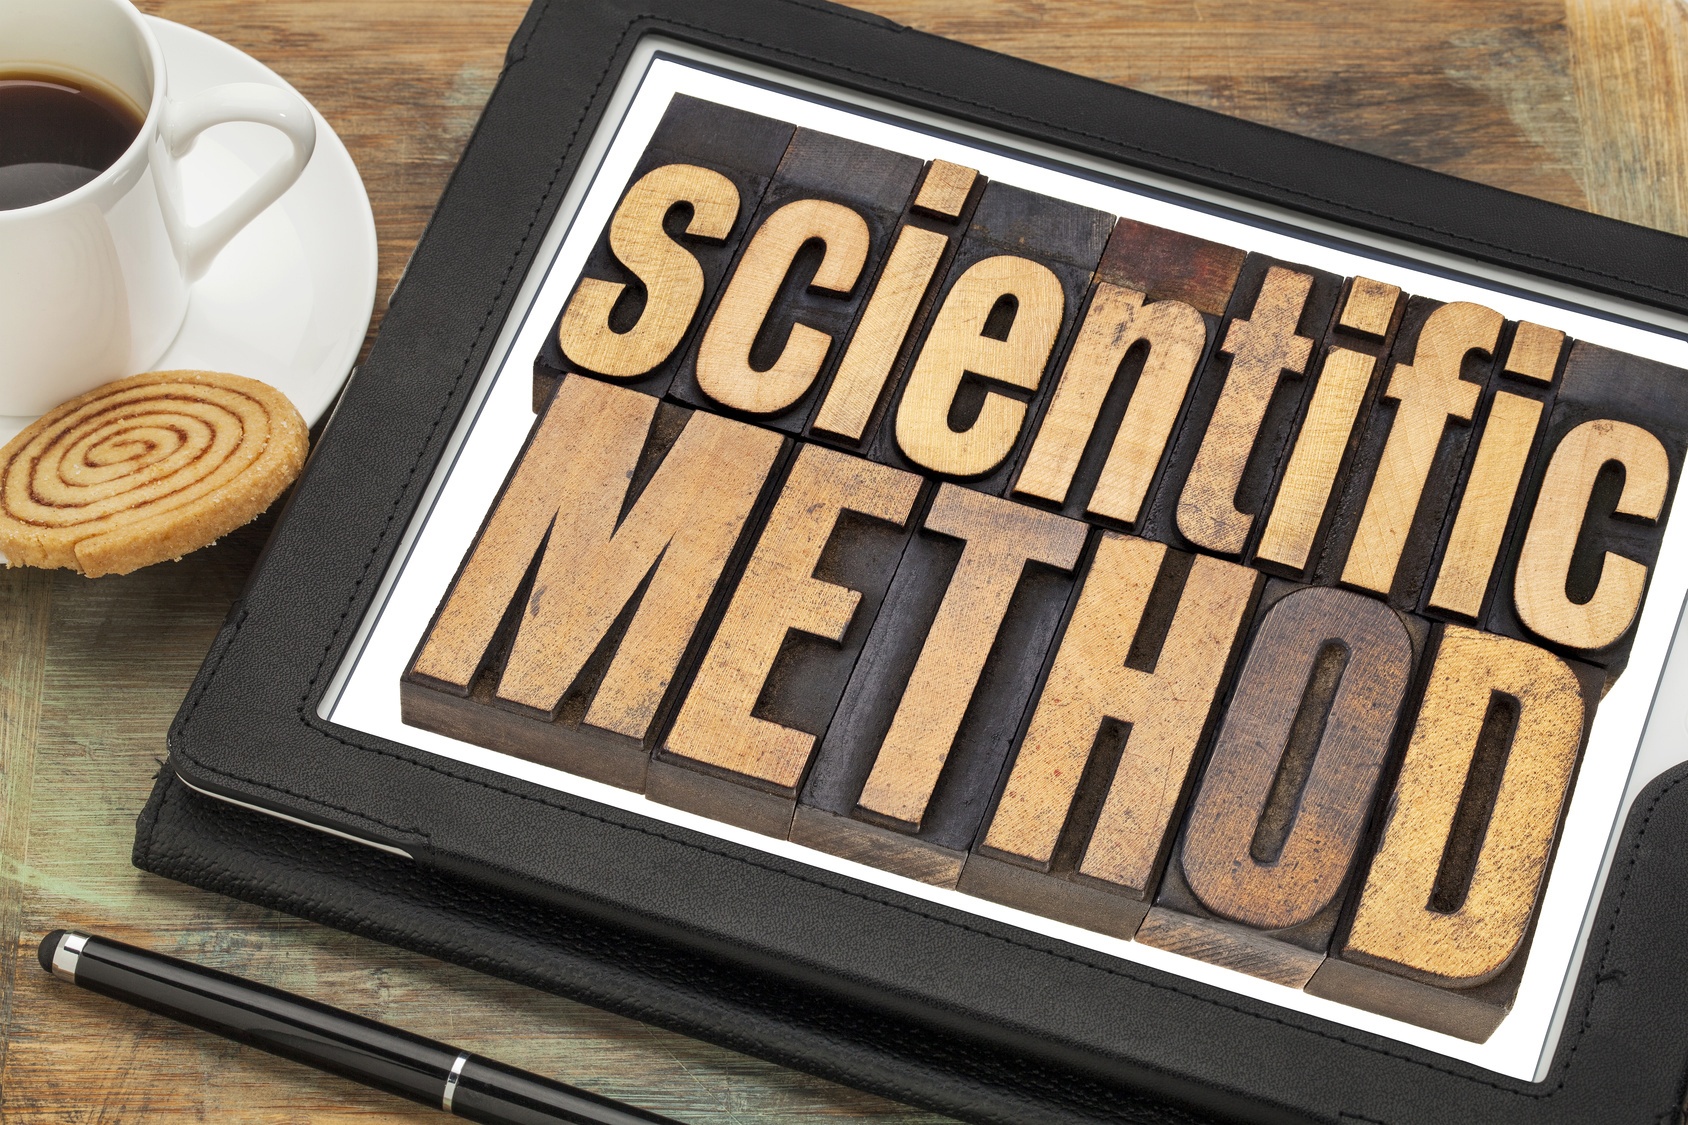 Take a Scientific Approach to Your Marketing